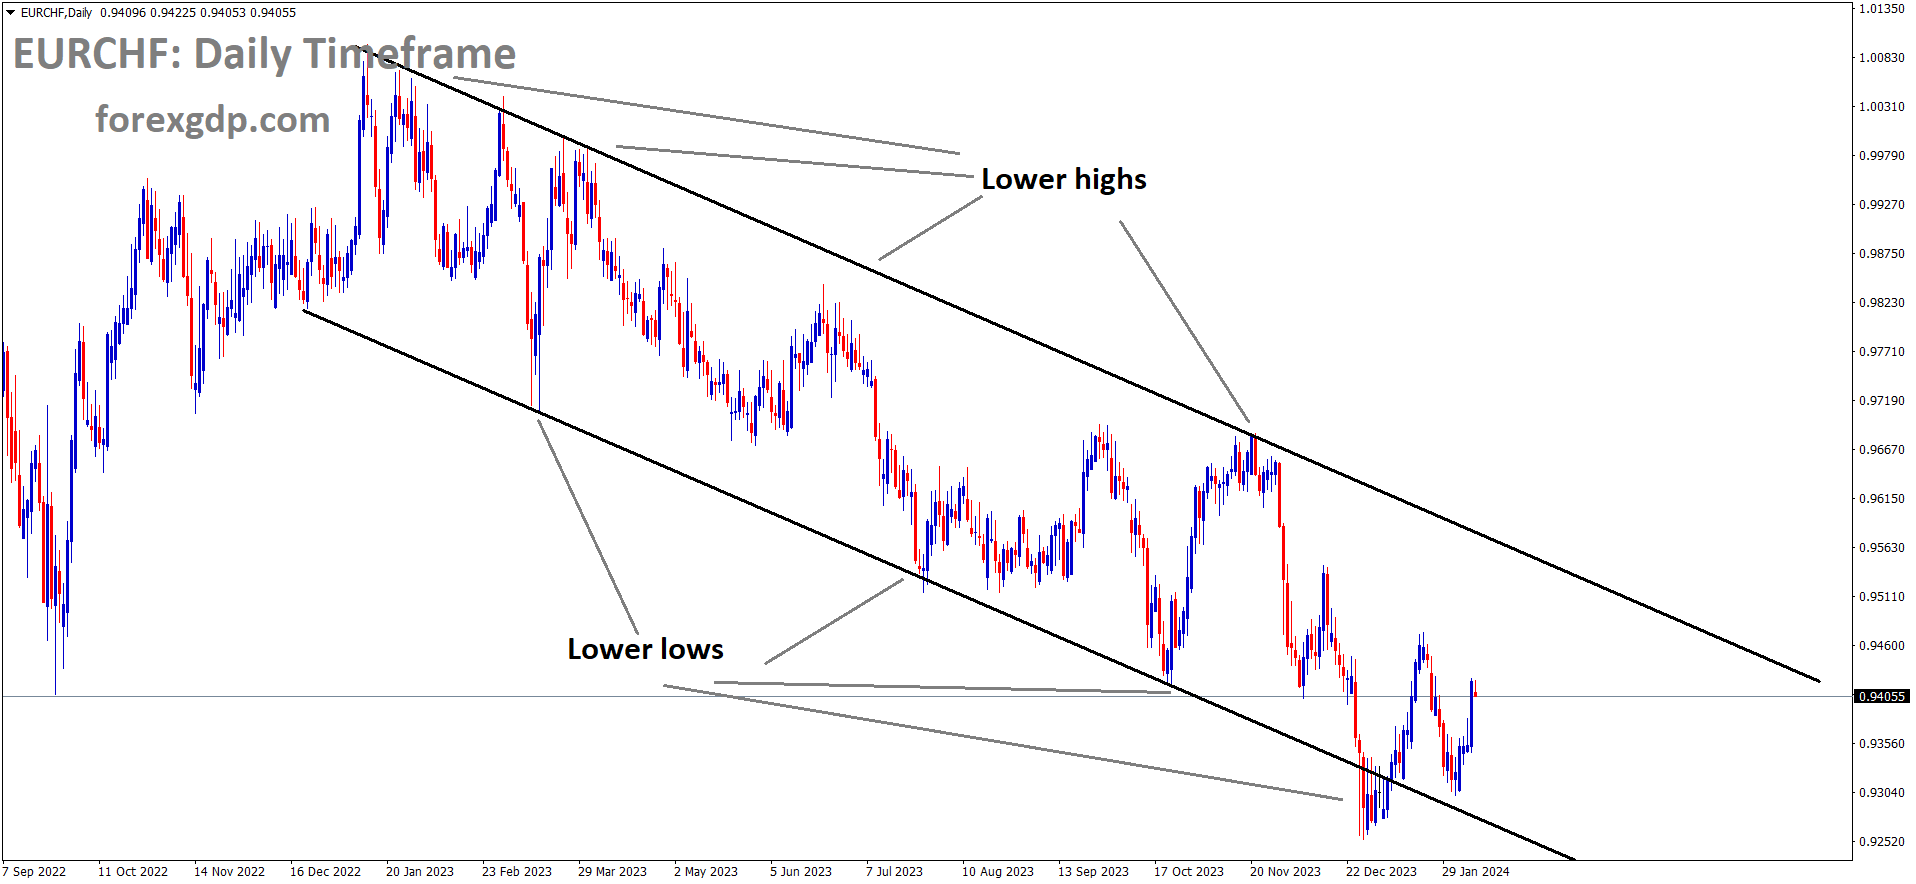 EURCHF is moving in the Descending channel and the market has rebounded from the lower low area of the channel